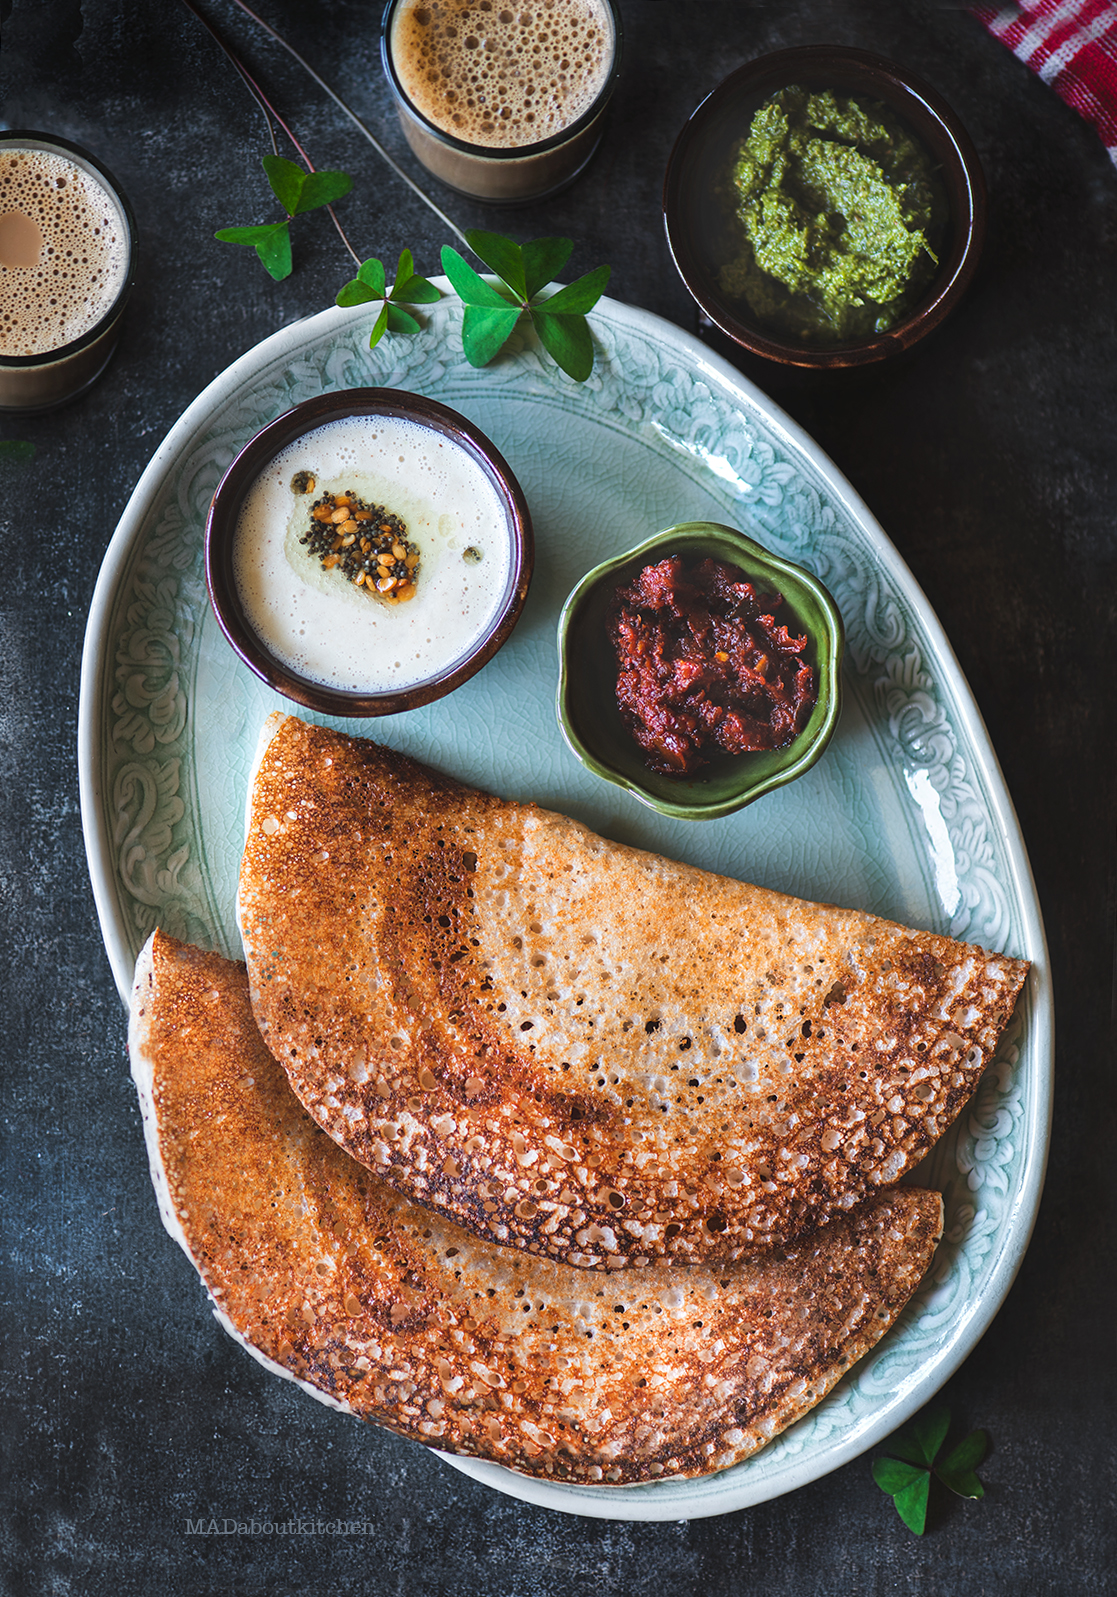 Avalakki Mosaru Dose or the Poha Curd Dosa made using Avalakki and mosaru is one of the easiest dosas to make. It is crisp, soft and is totally yum.